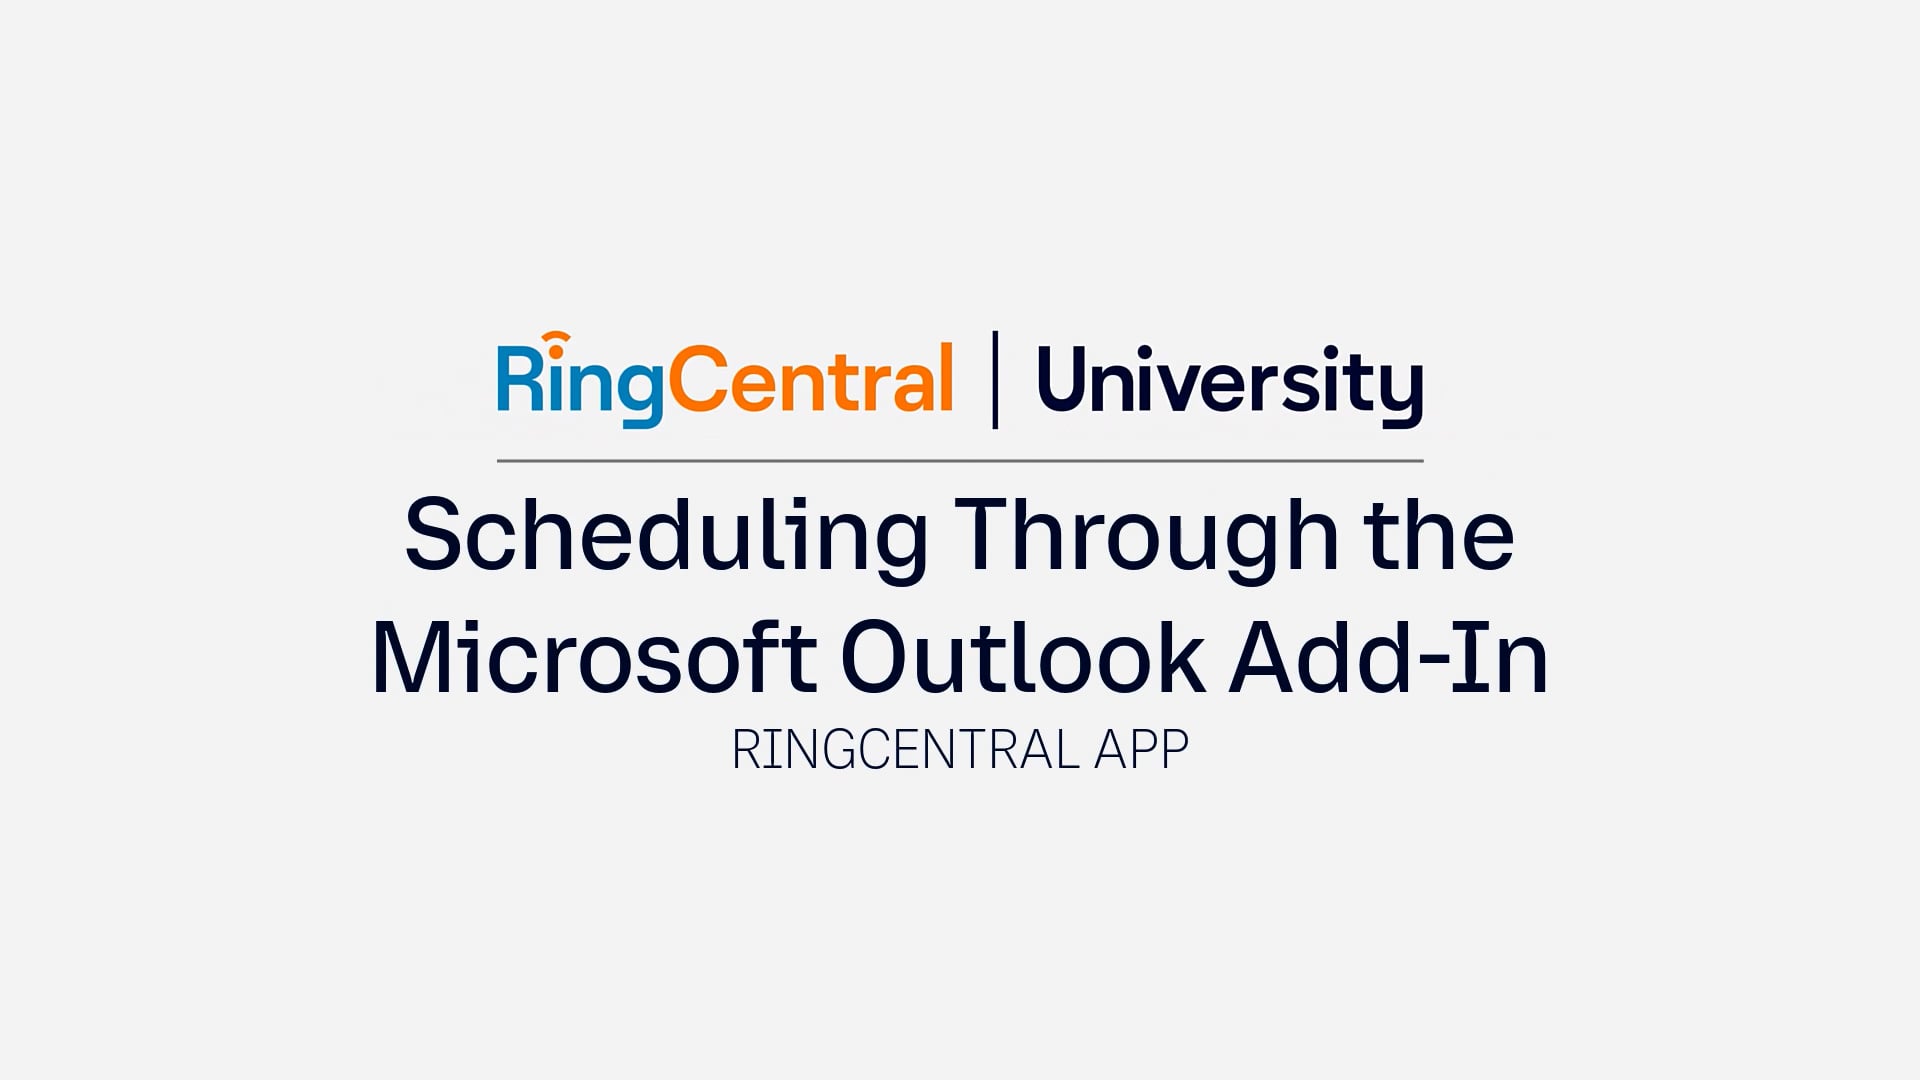 RingCentral Video: Scheduling Through the Microsoft Outlook Add-In